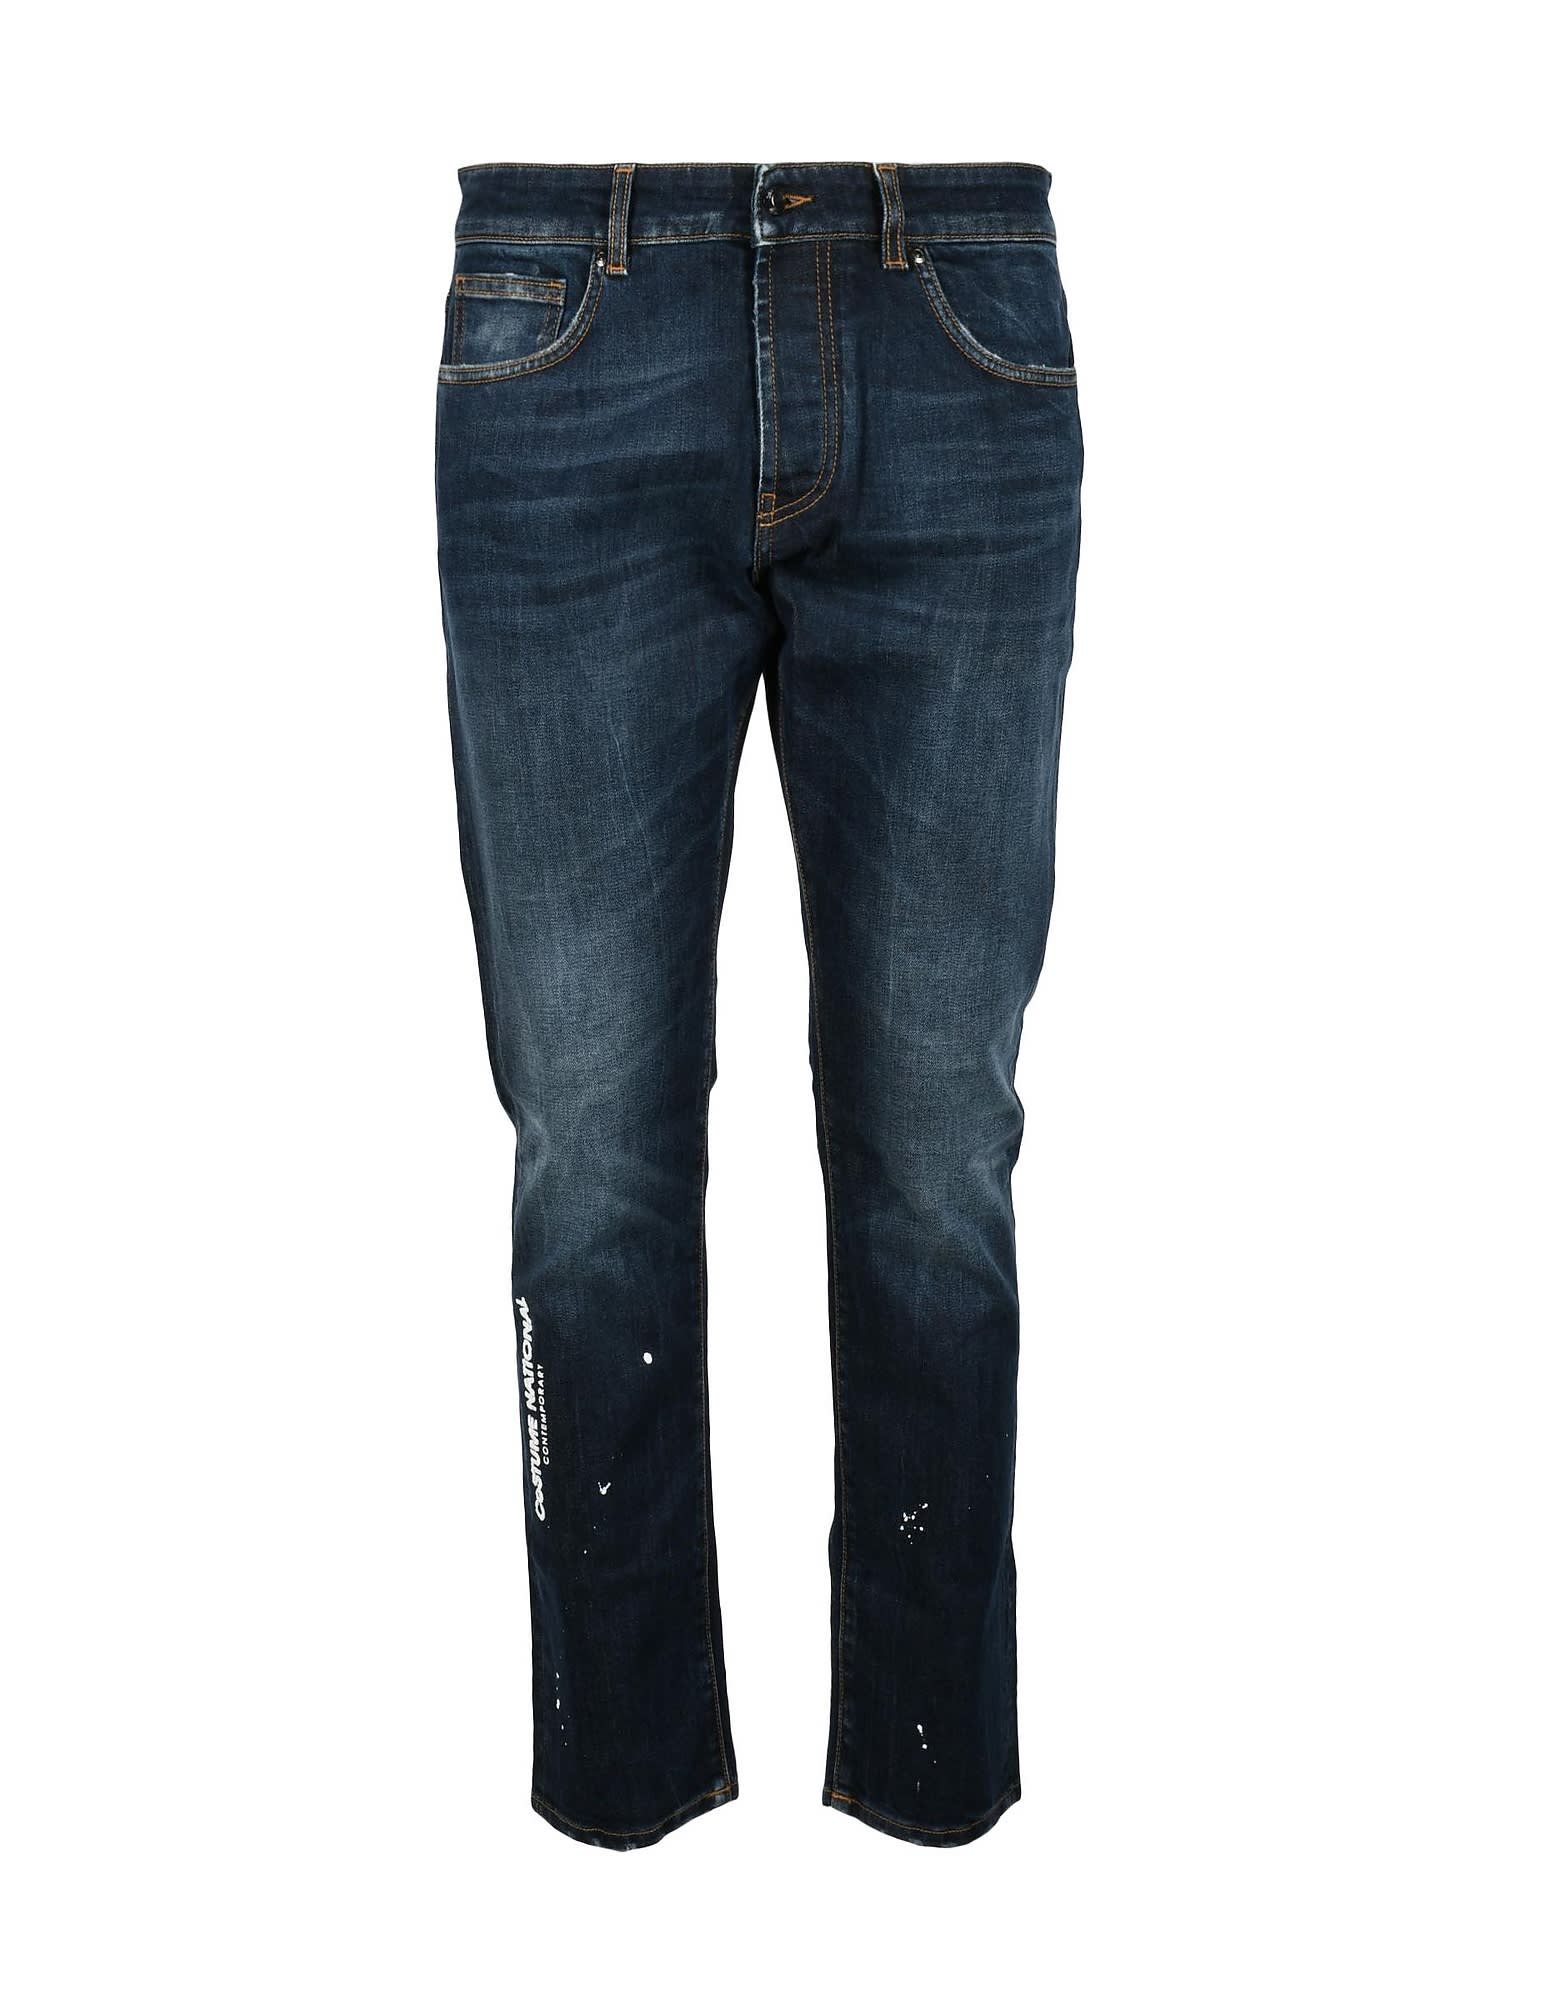 CoSTUME NATIONAL CONTEMPORARY Mens Blue Jeans